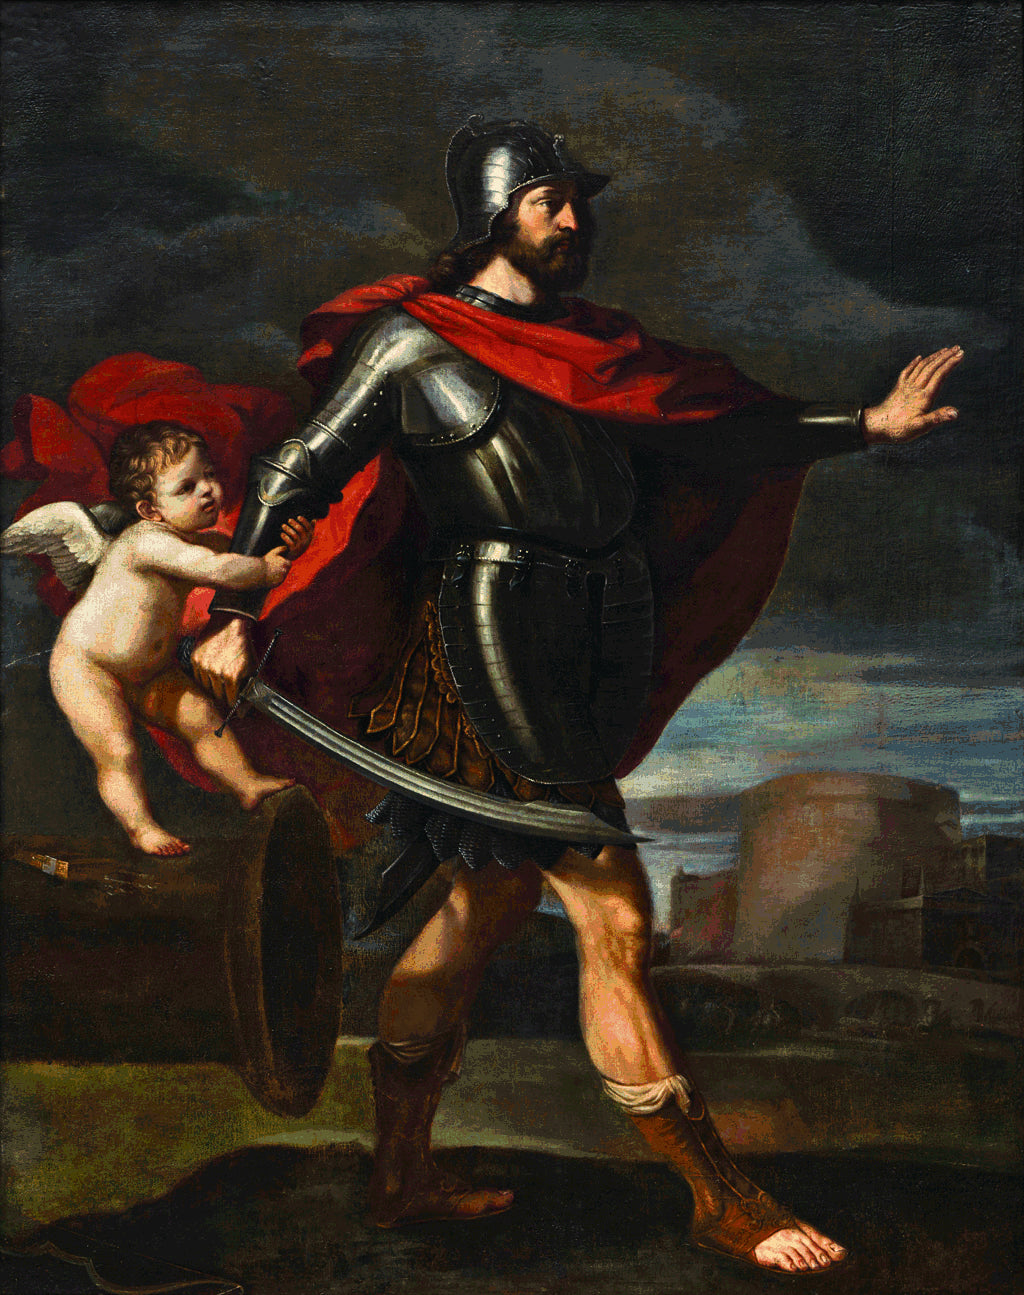 amorino or cupid in a painting stopping a roman soldier from going to war - brockwell incorporated